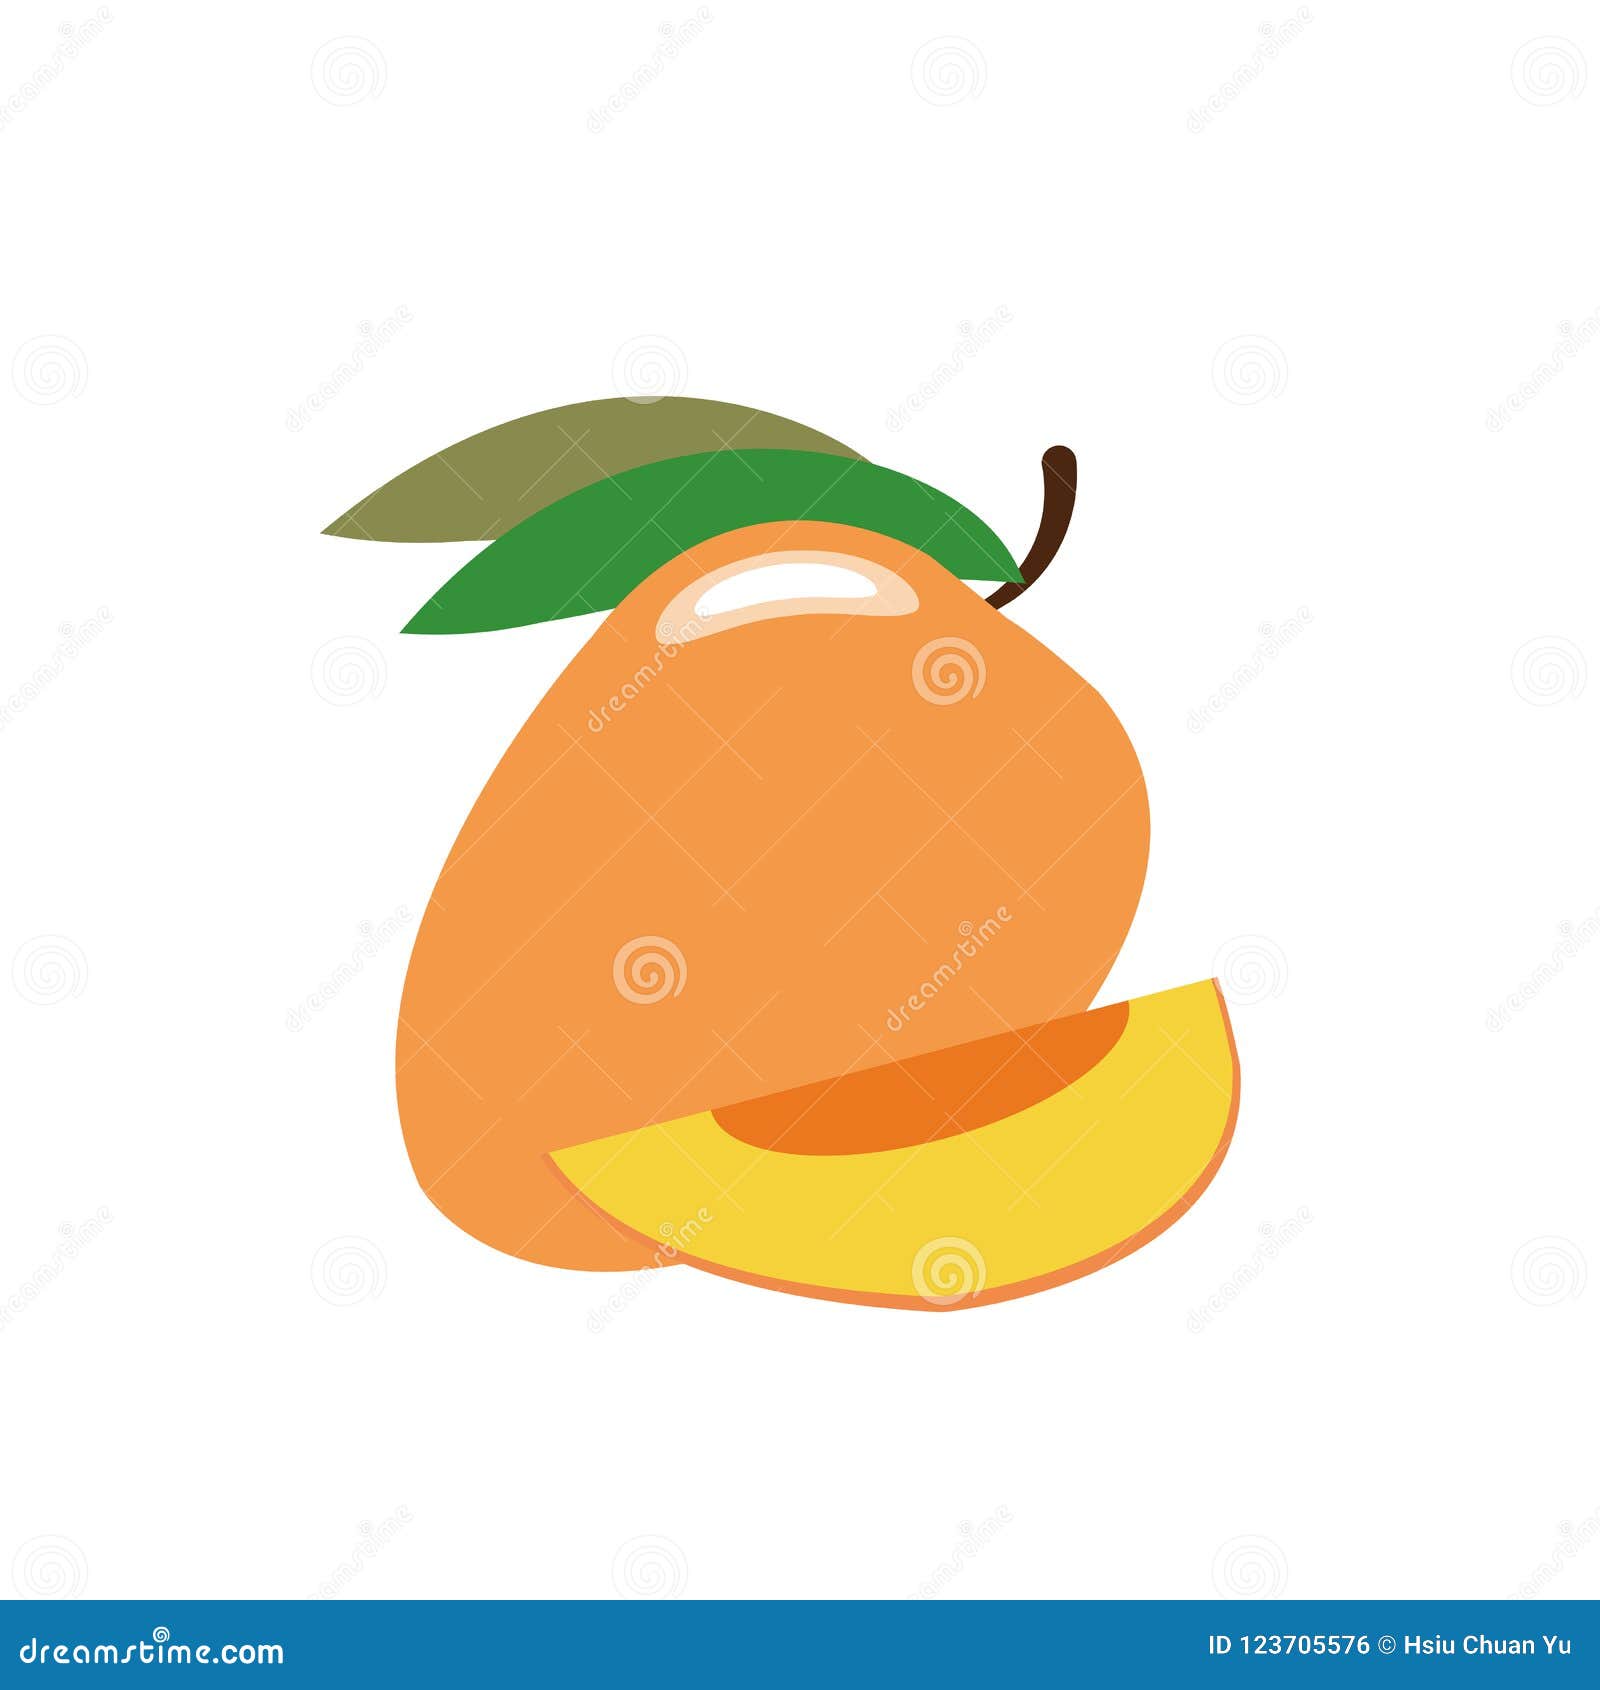 A Nature Healthy Organic Mango Stock Vector - Illustration of seed ...